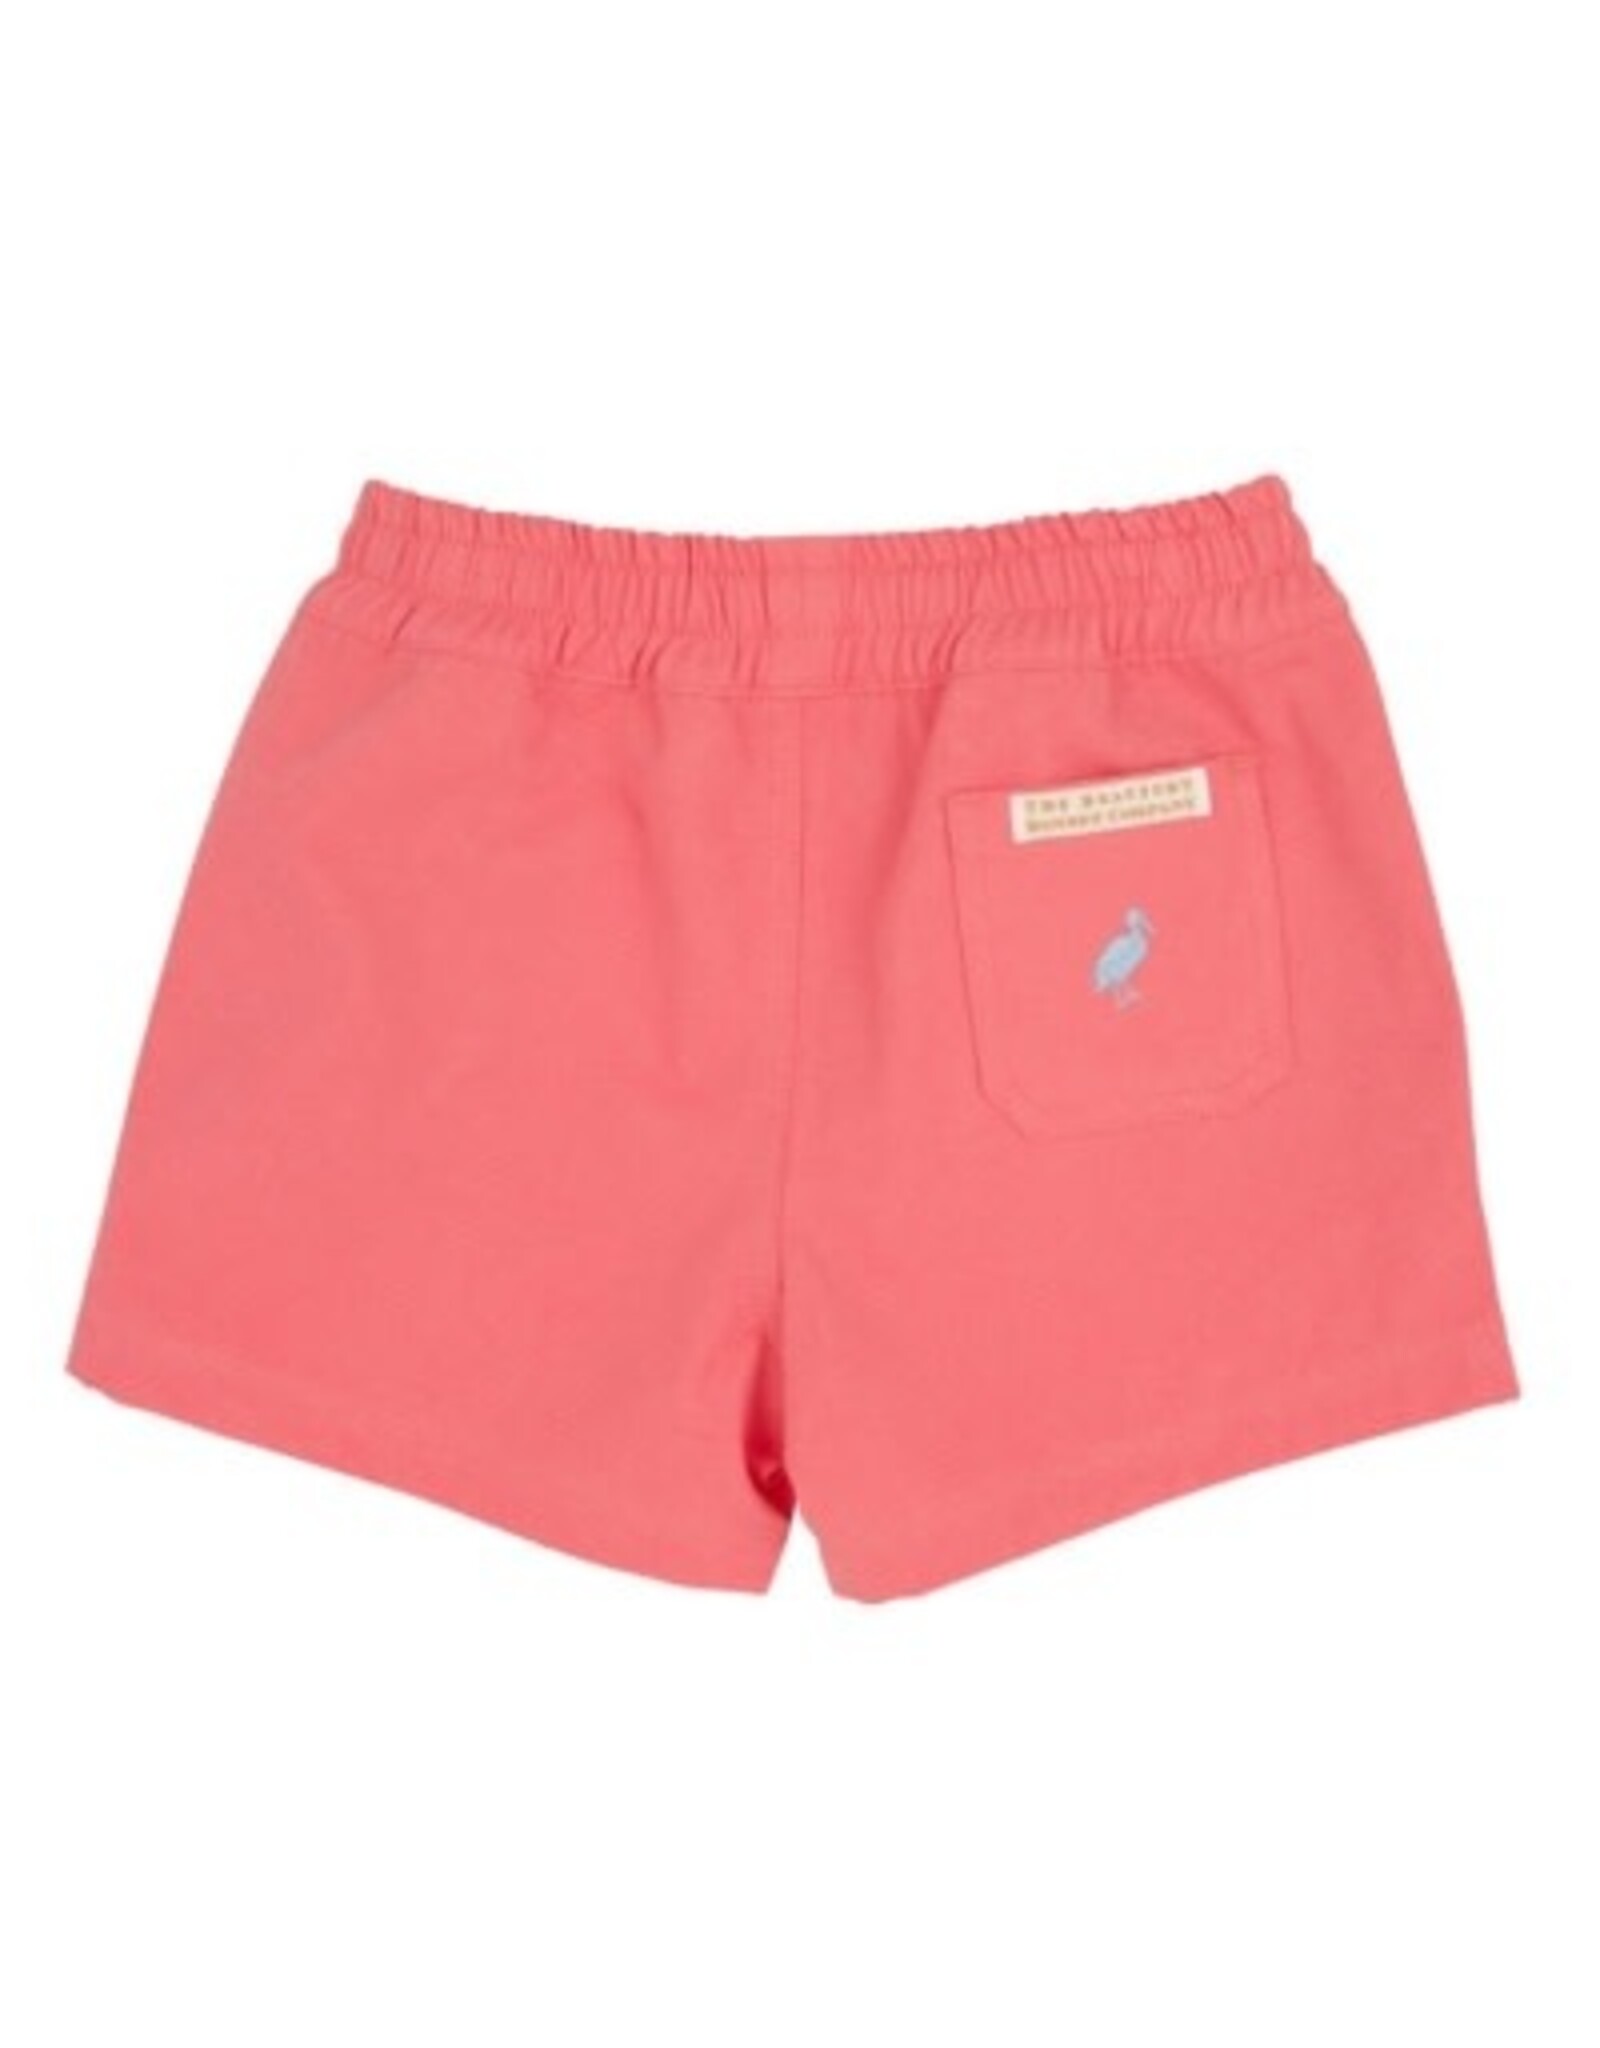 The Beaufort Bonnet Company Sheffield Shorts, Parrot Cay Coral